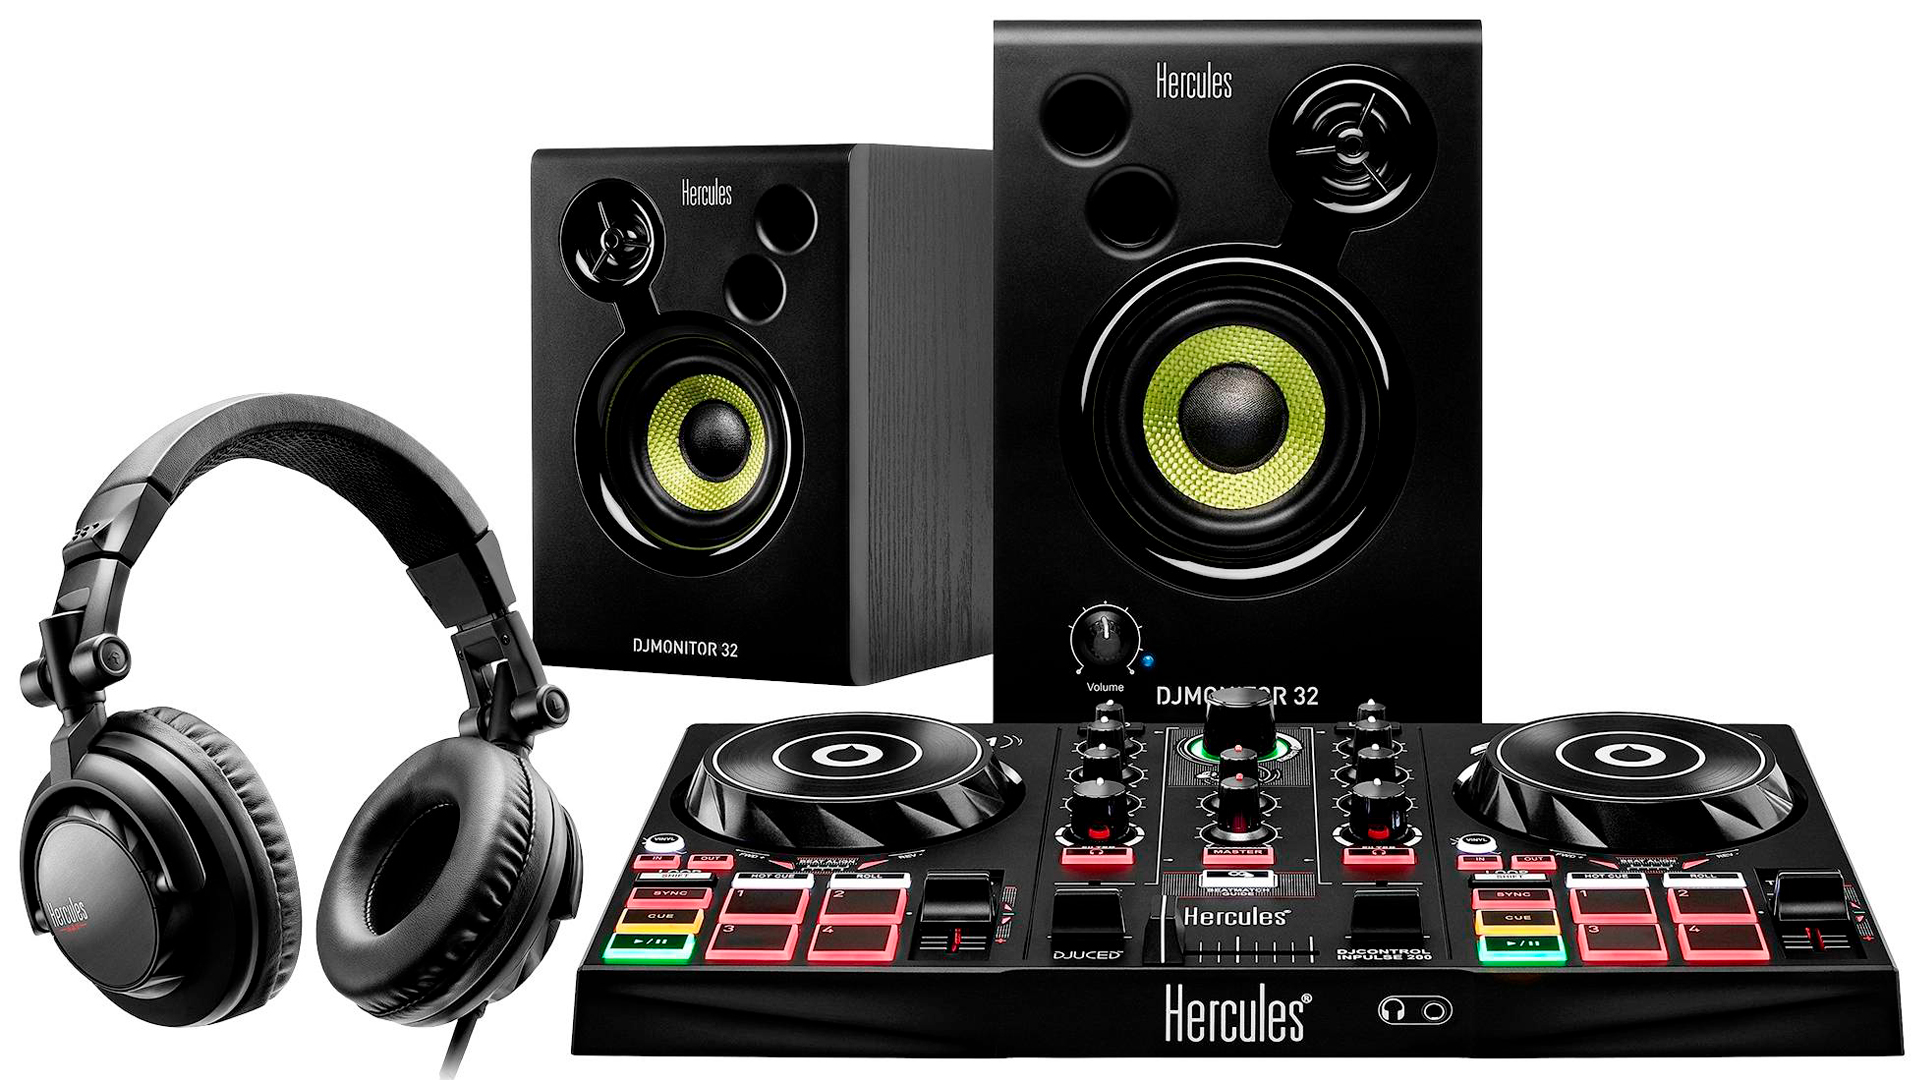 HERCULES – THE PERFECT ALL-IN-ONE KIT TO LEARN MIXING AND BECOME A DJ